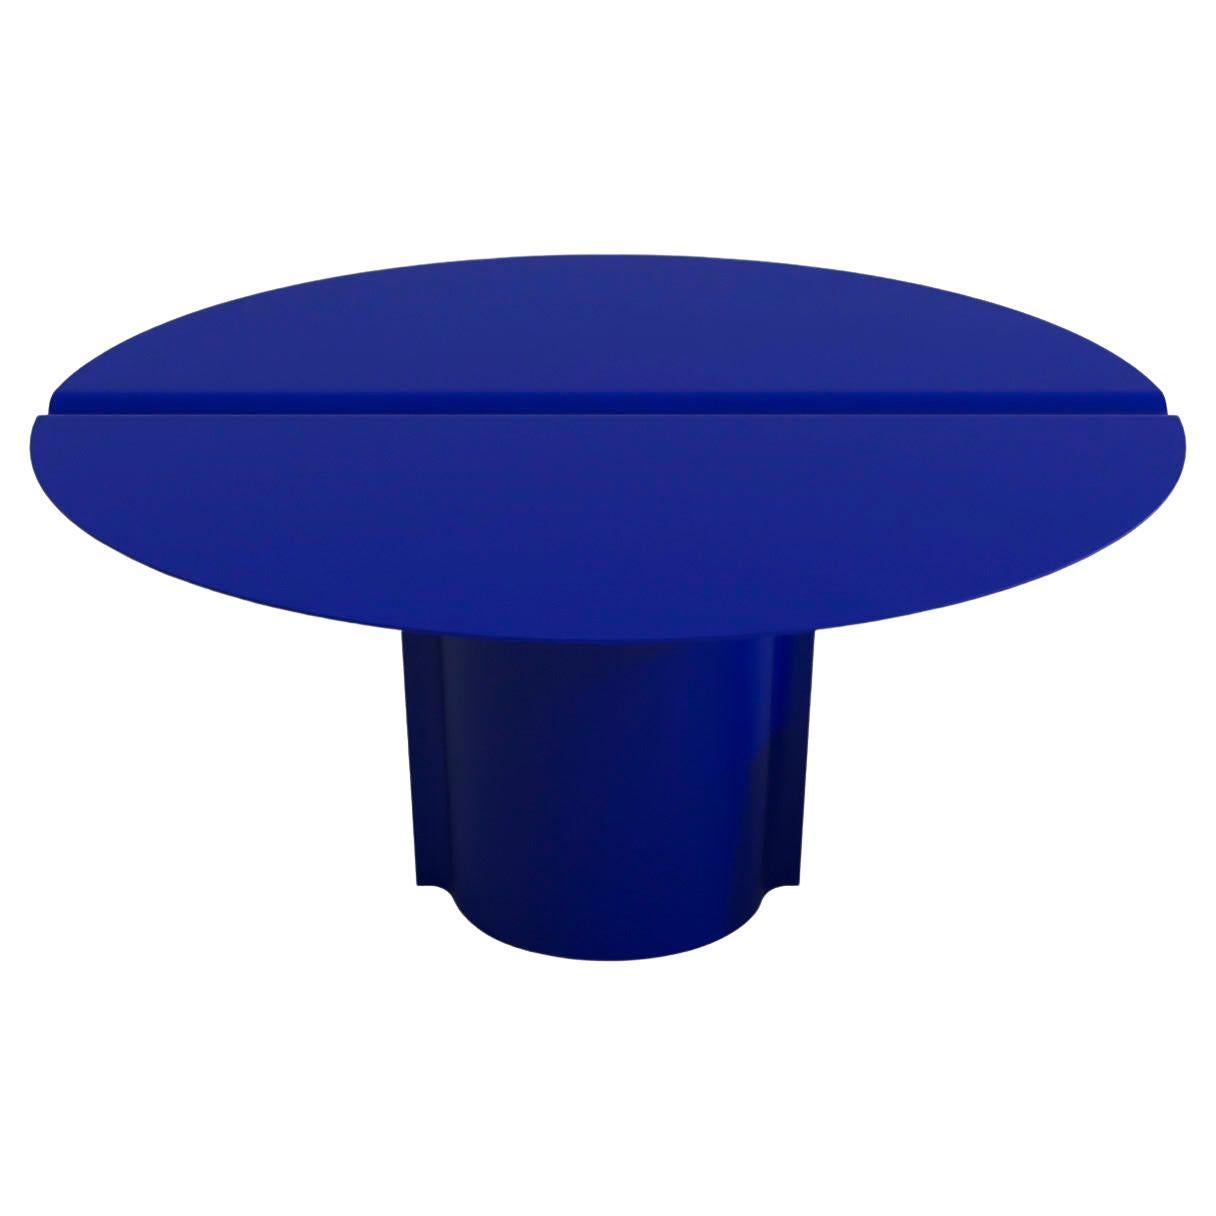 Contemporary Round Table in Blue Powdercoated Stainless Steel, Mirrored Table